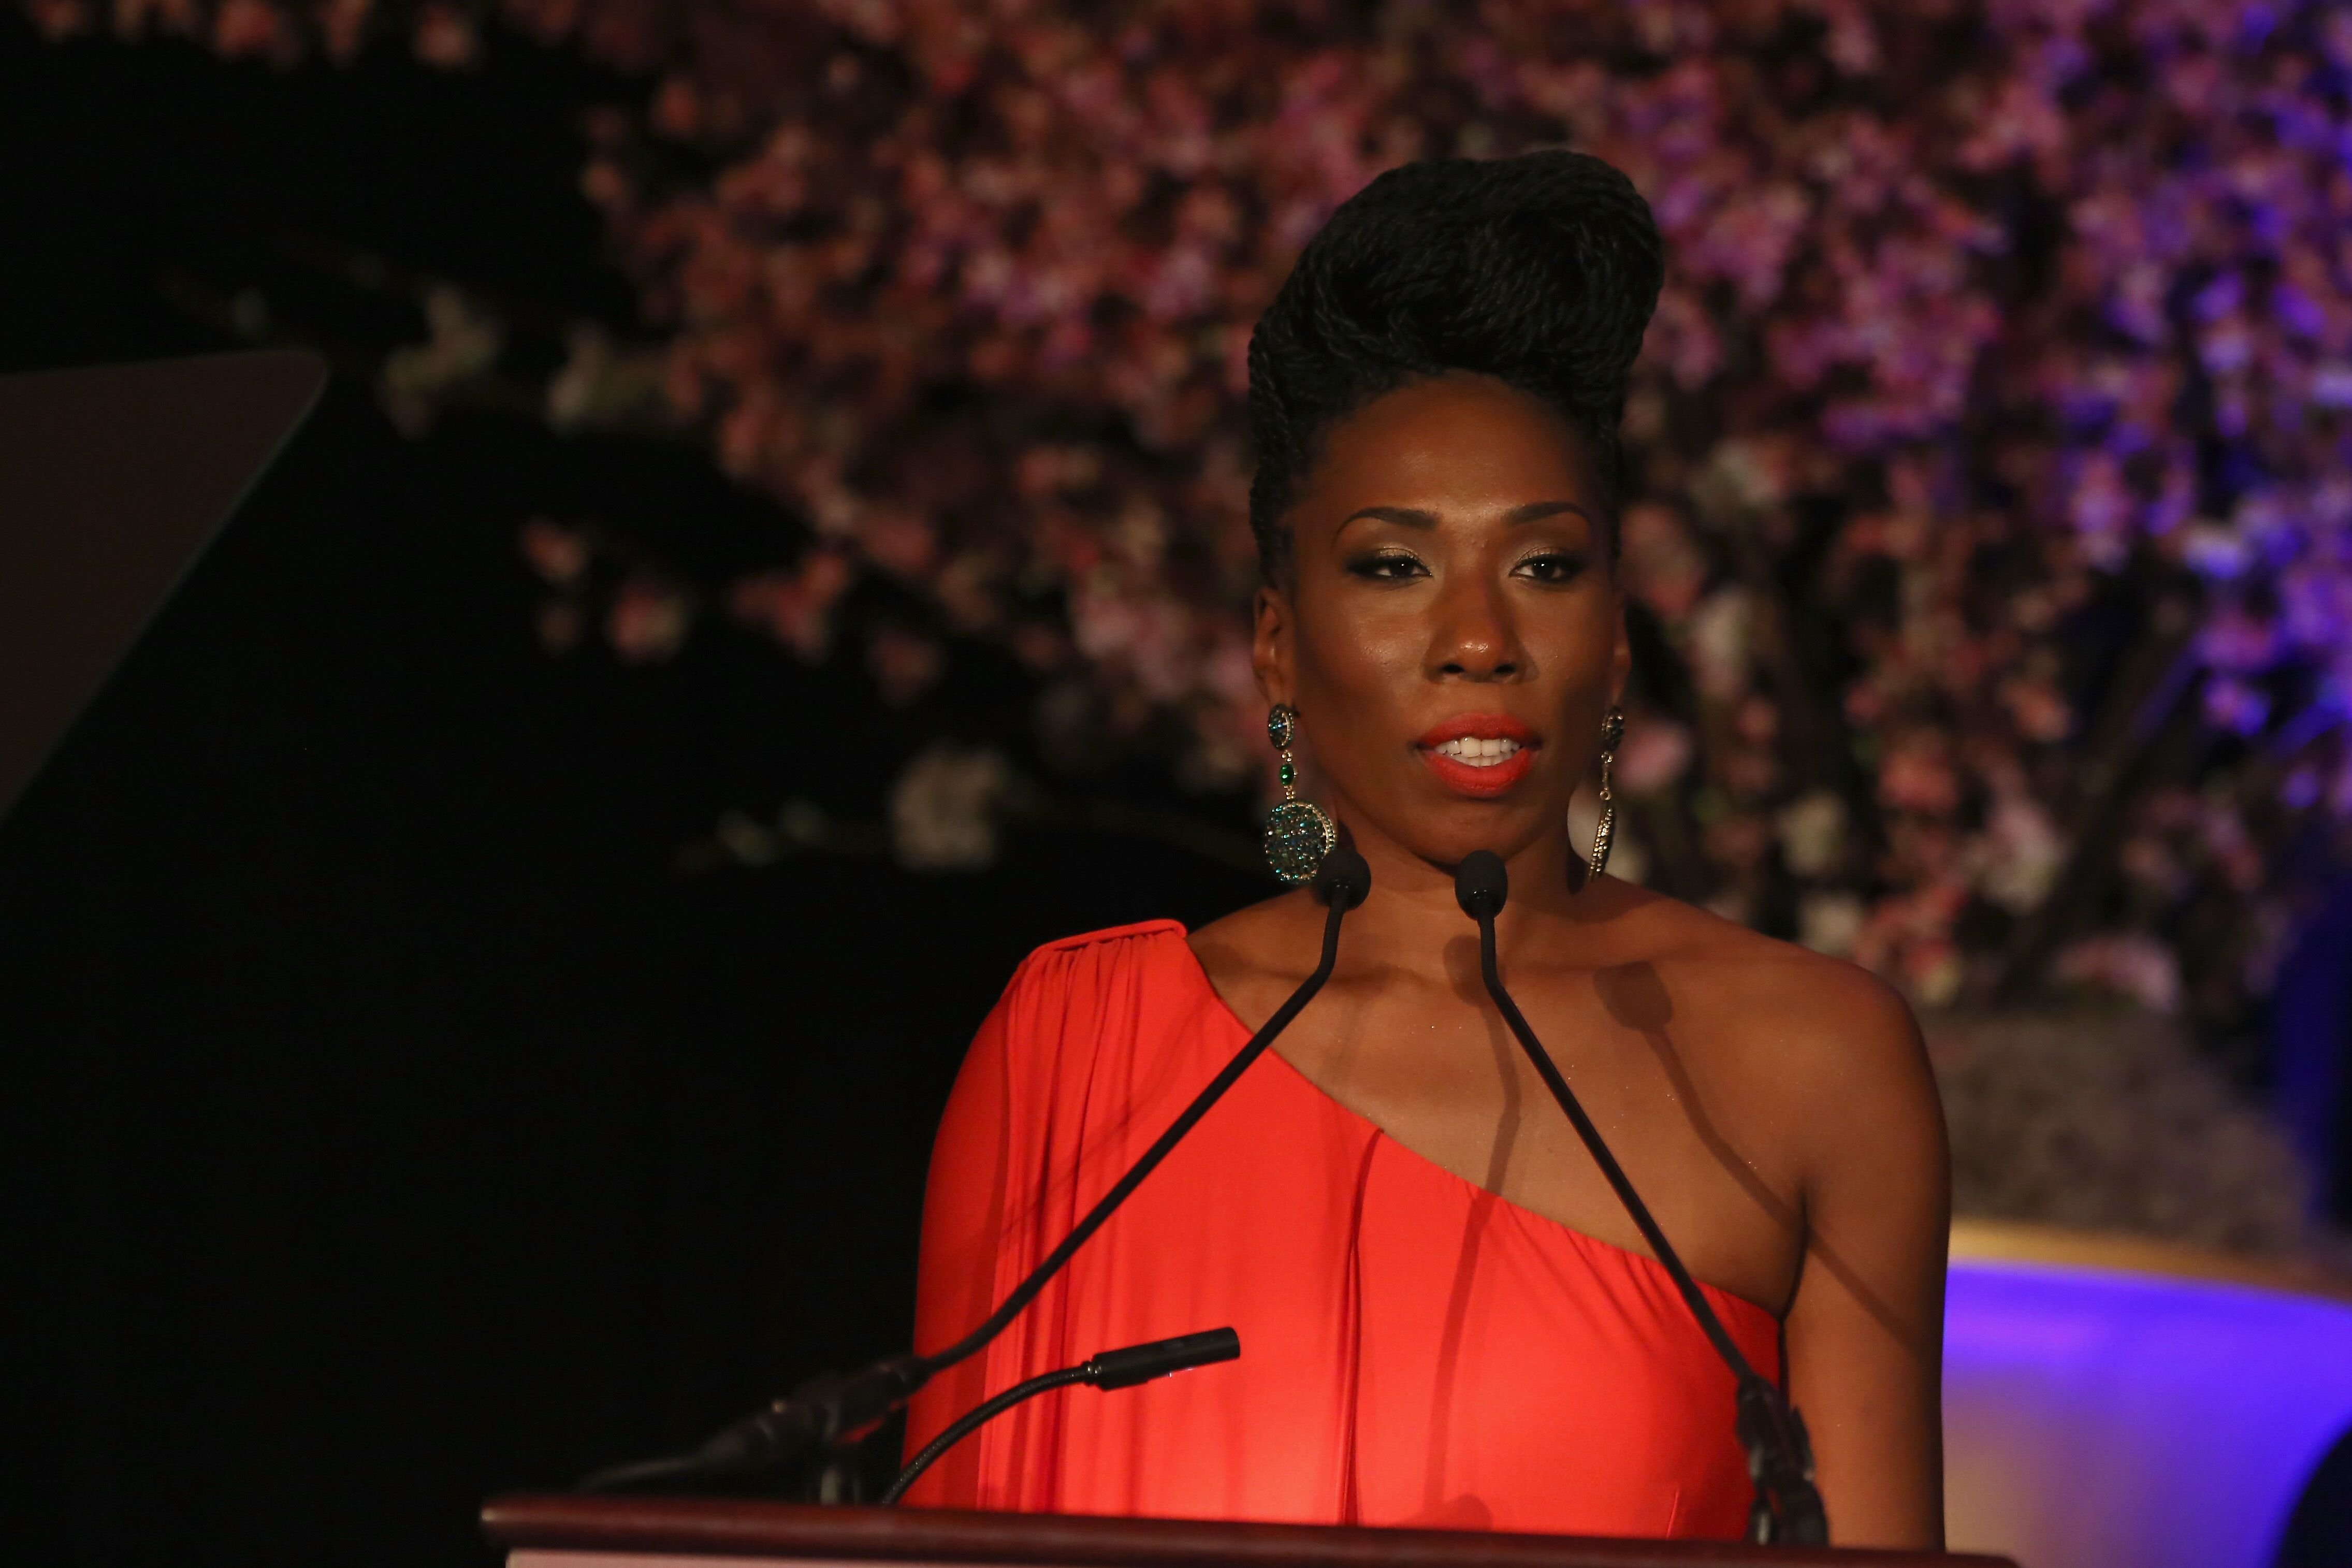 Brandi Harvey attends the 2014 Steve & Marjorie Harvey Foundation Gala presented by Coca-Cola at the Hilton Chicago on May 3, 2014 in Chicago, Illinois | Photo: Getty Images